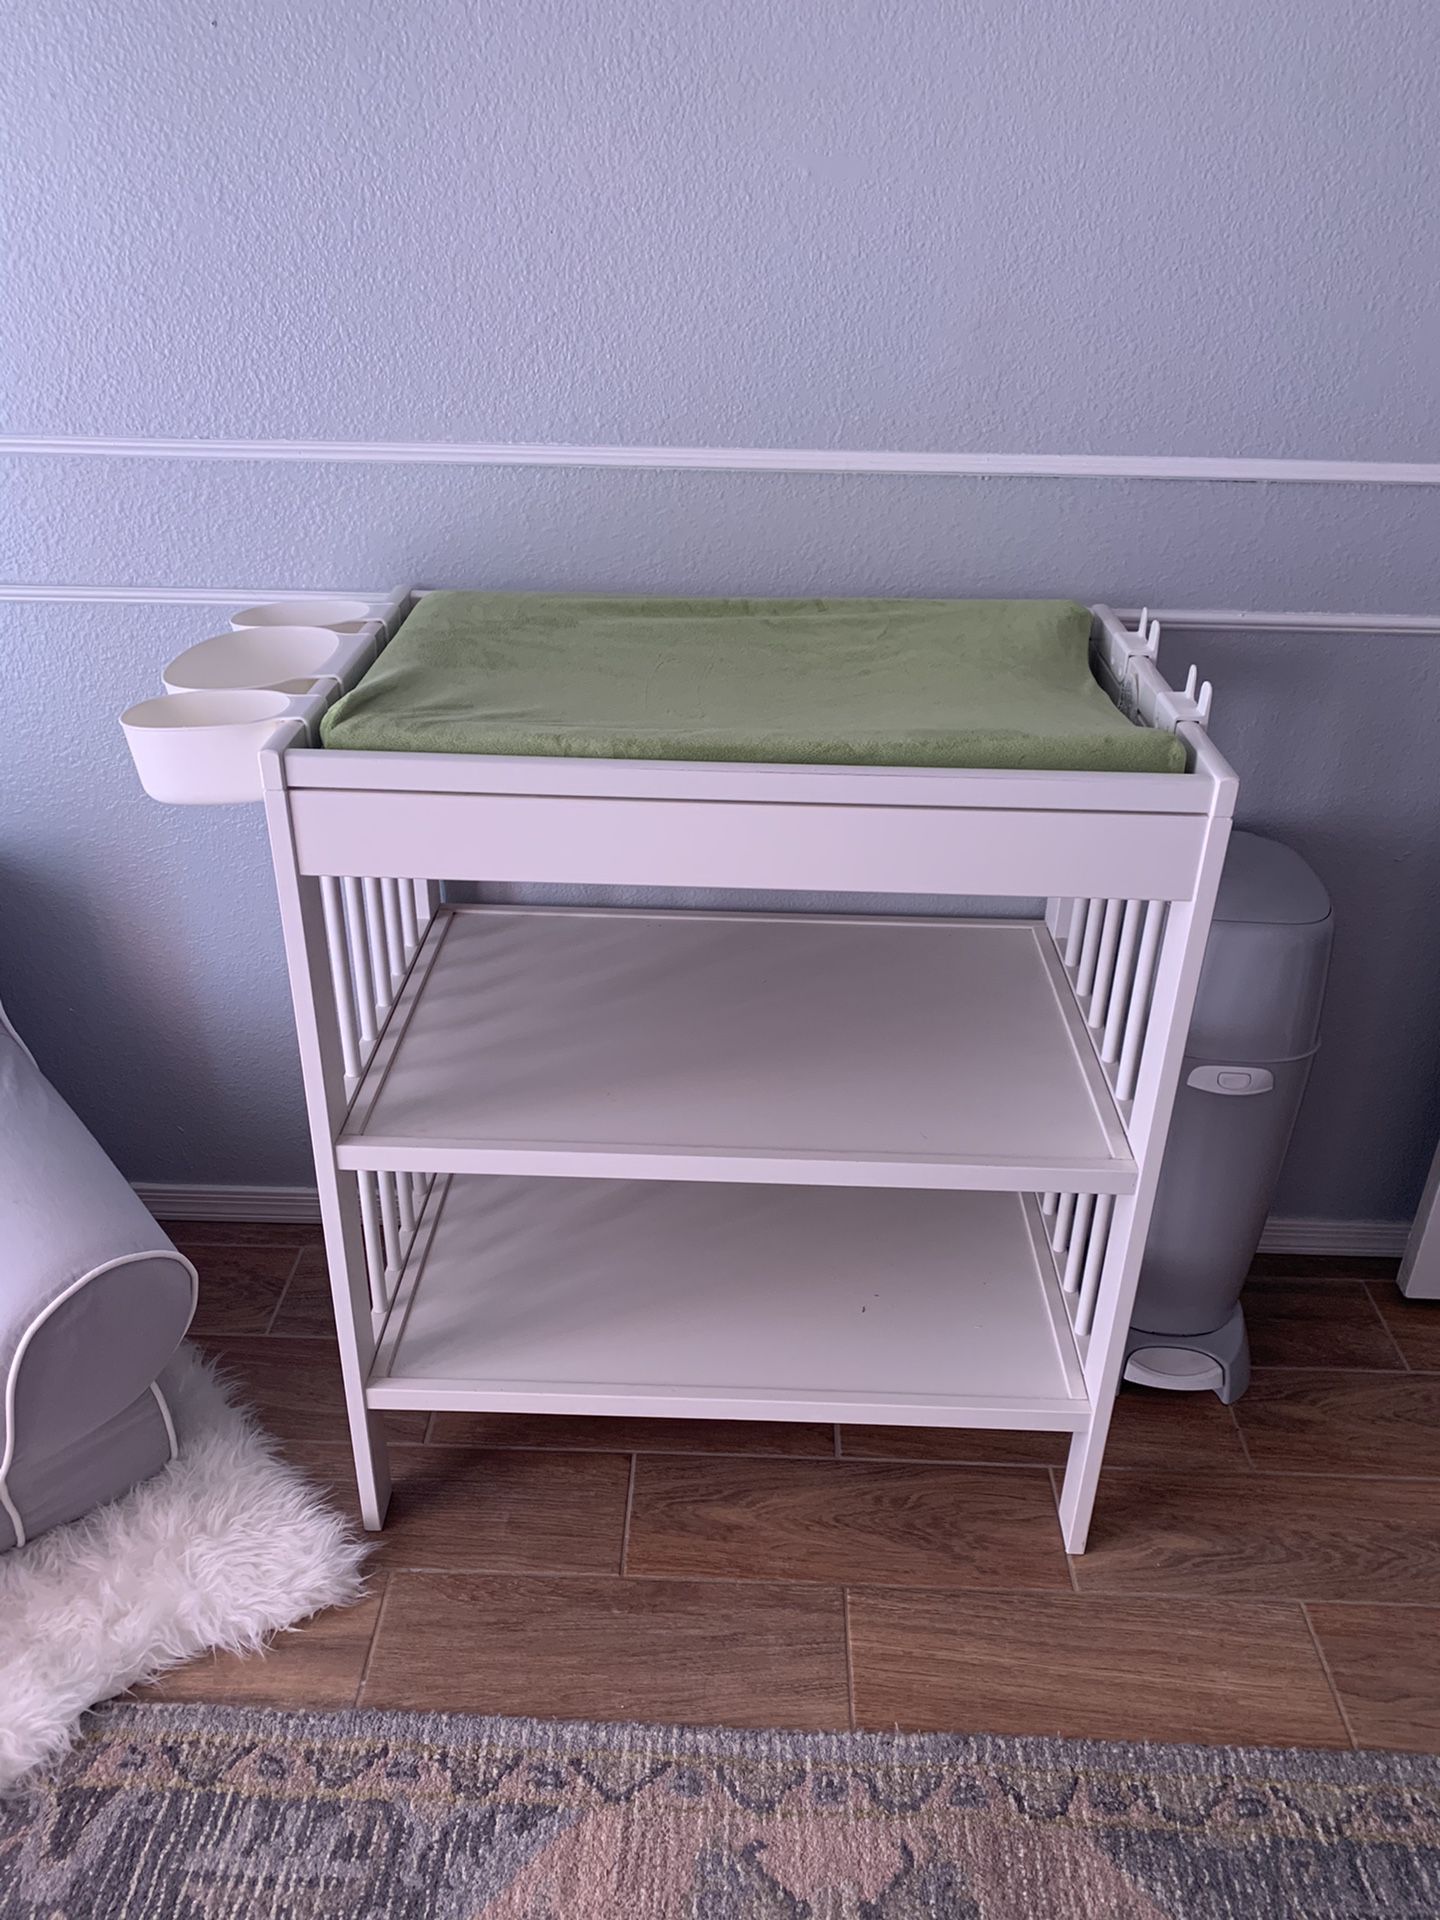 IKEA Changing Table